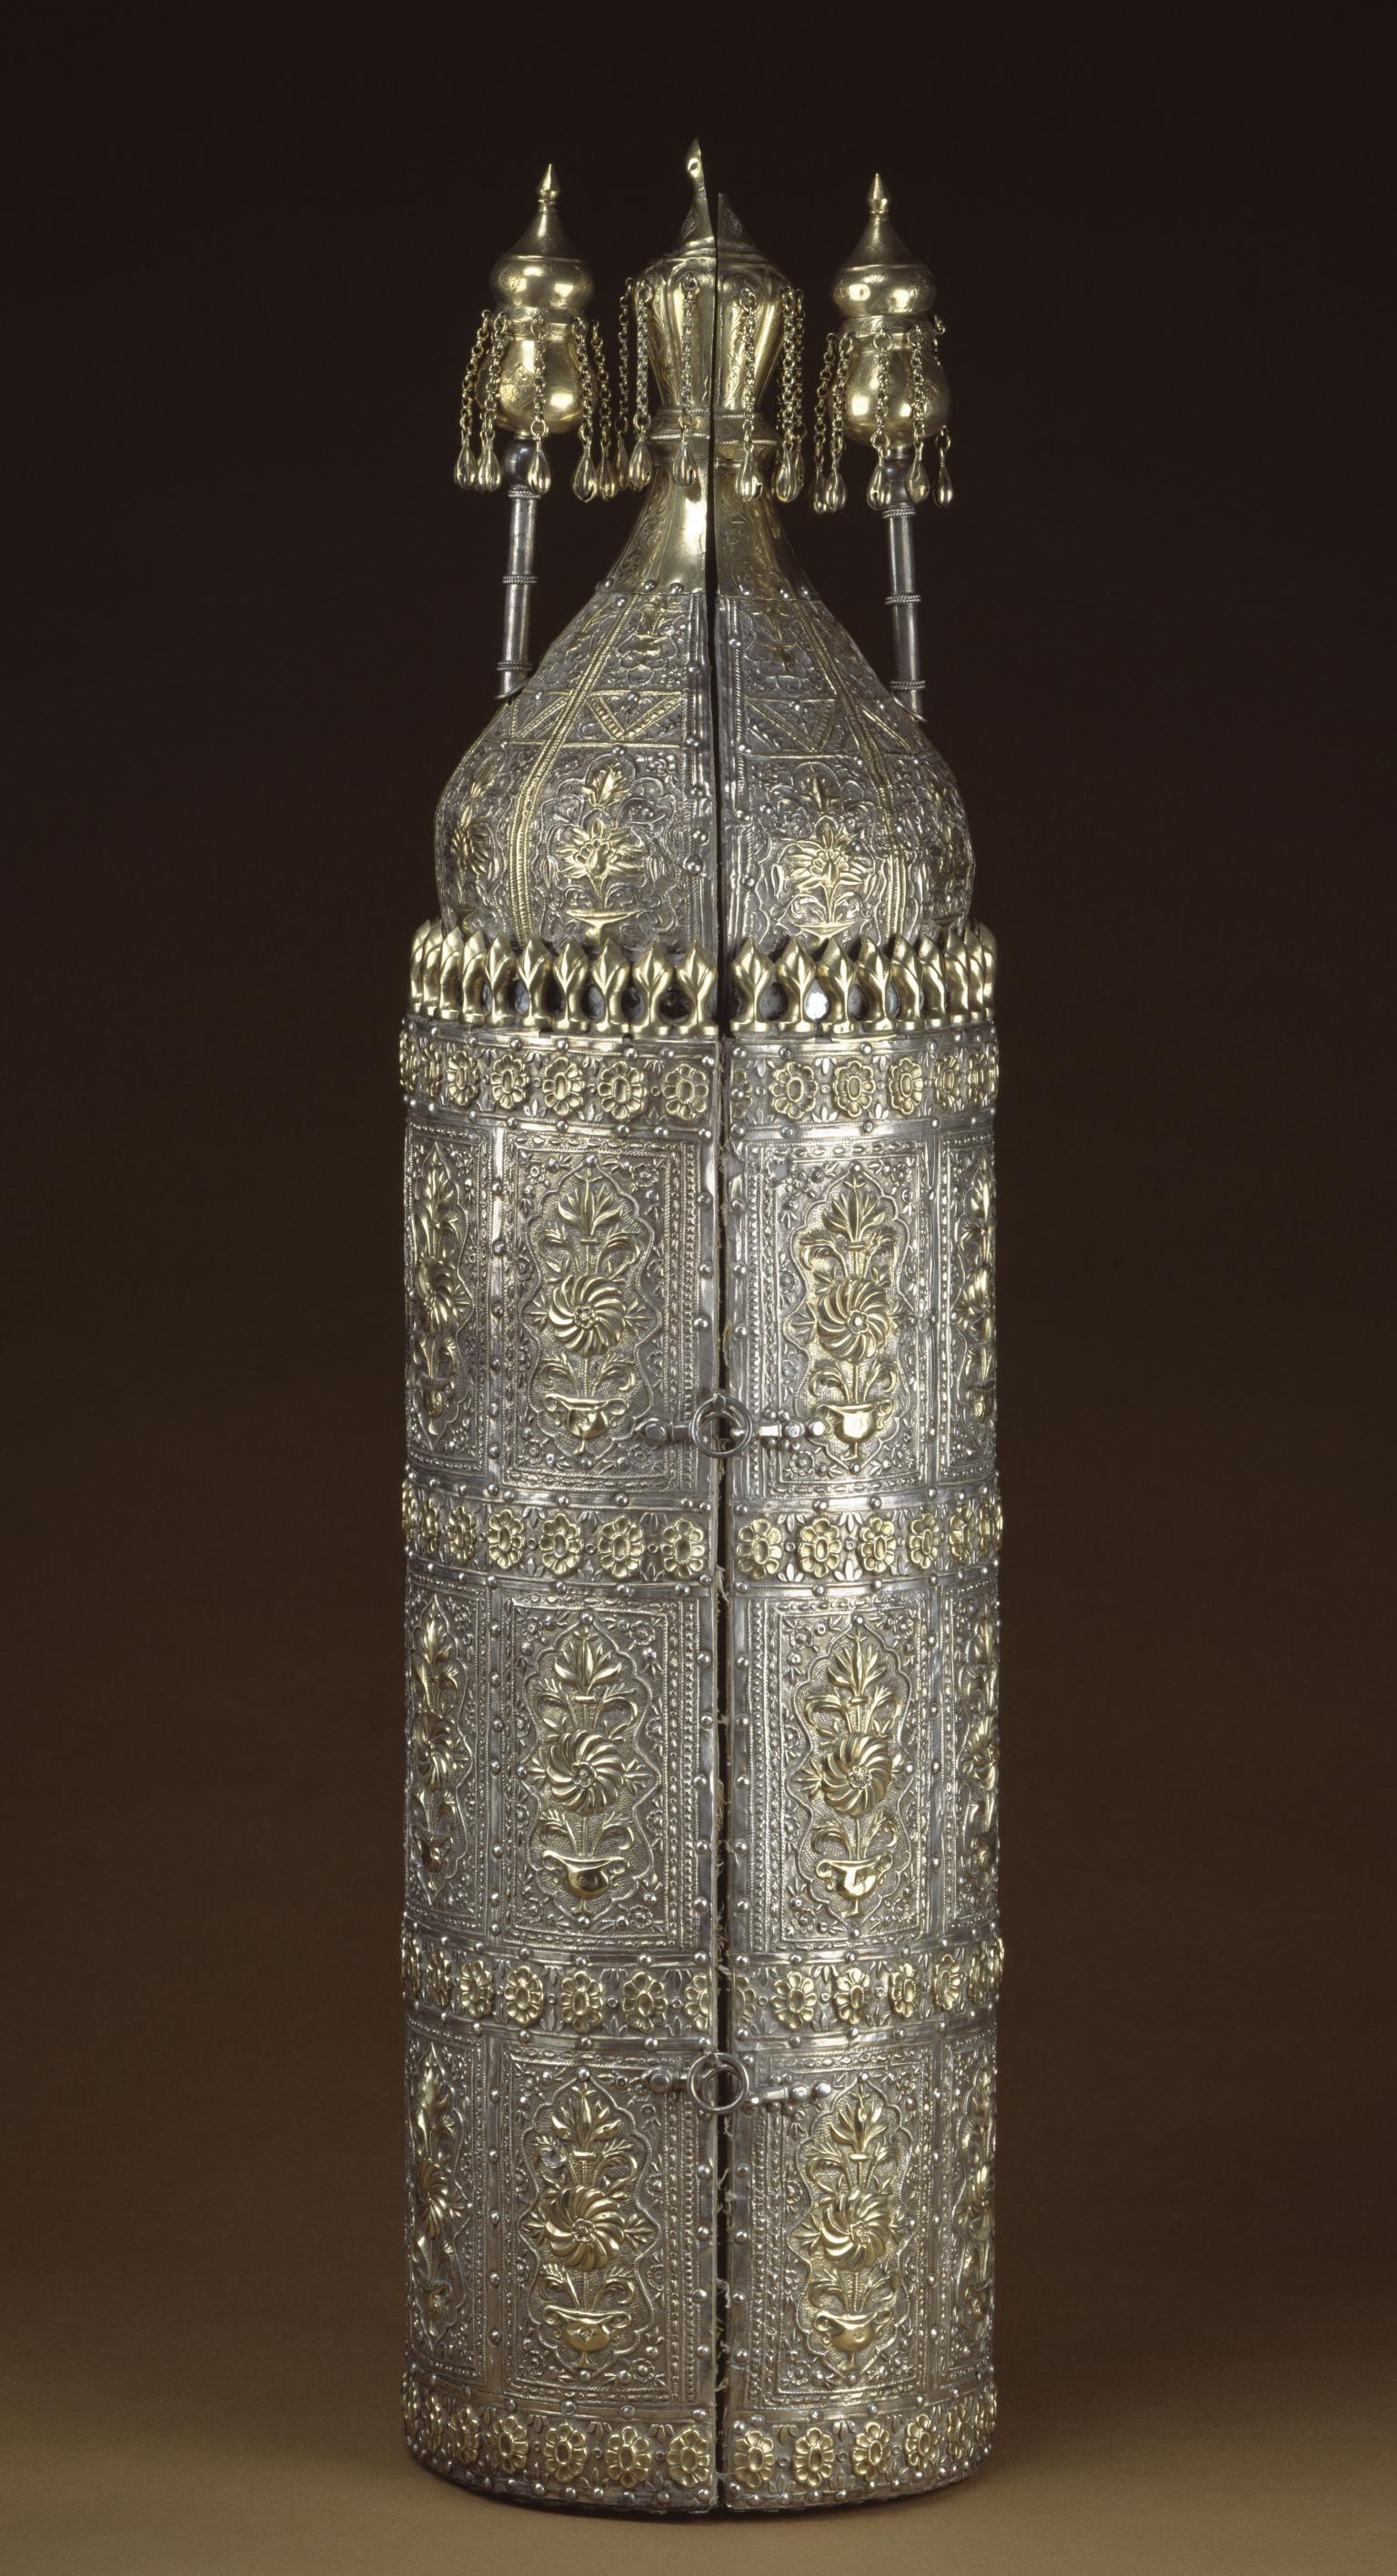 Ornately decorated cylindrical case with Hebrew writing on top and scroll inside; closed cylindrical case with ornate decoration.